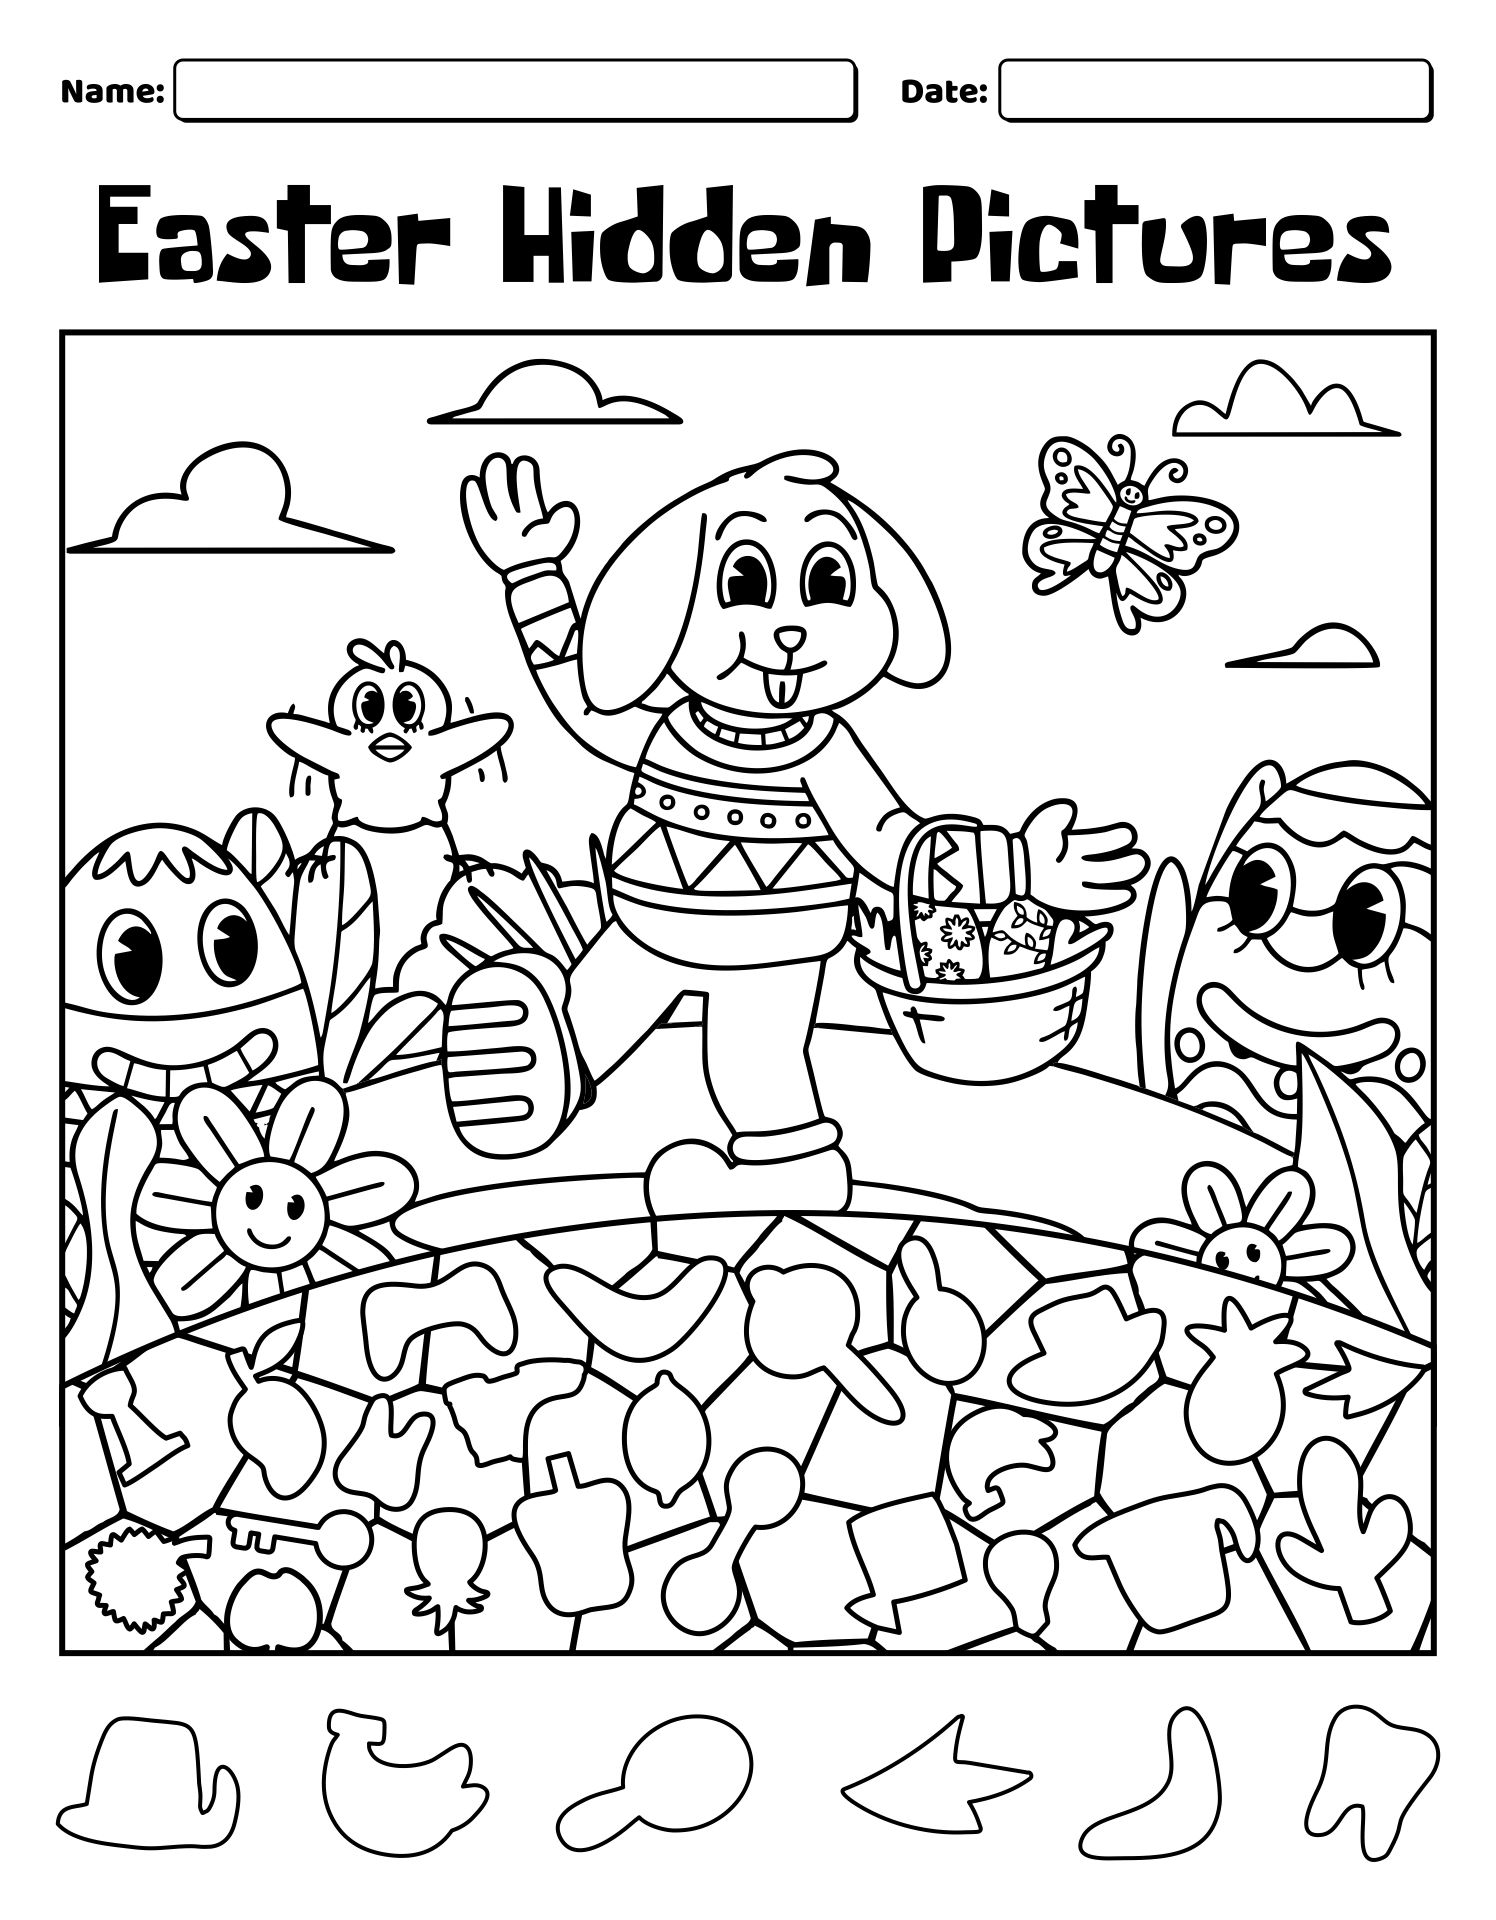 Easter Hidden Pictures Printables